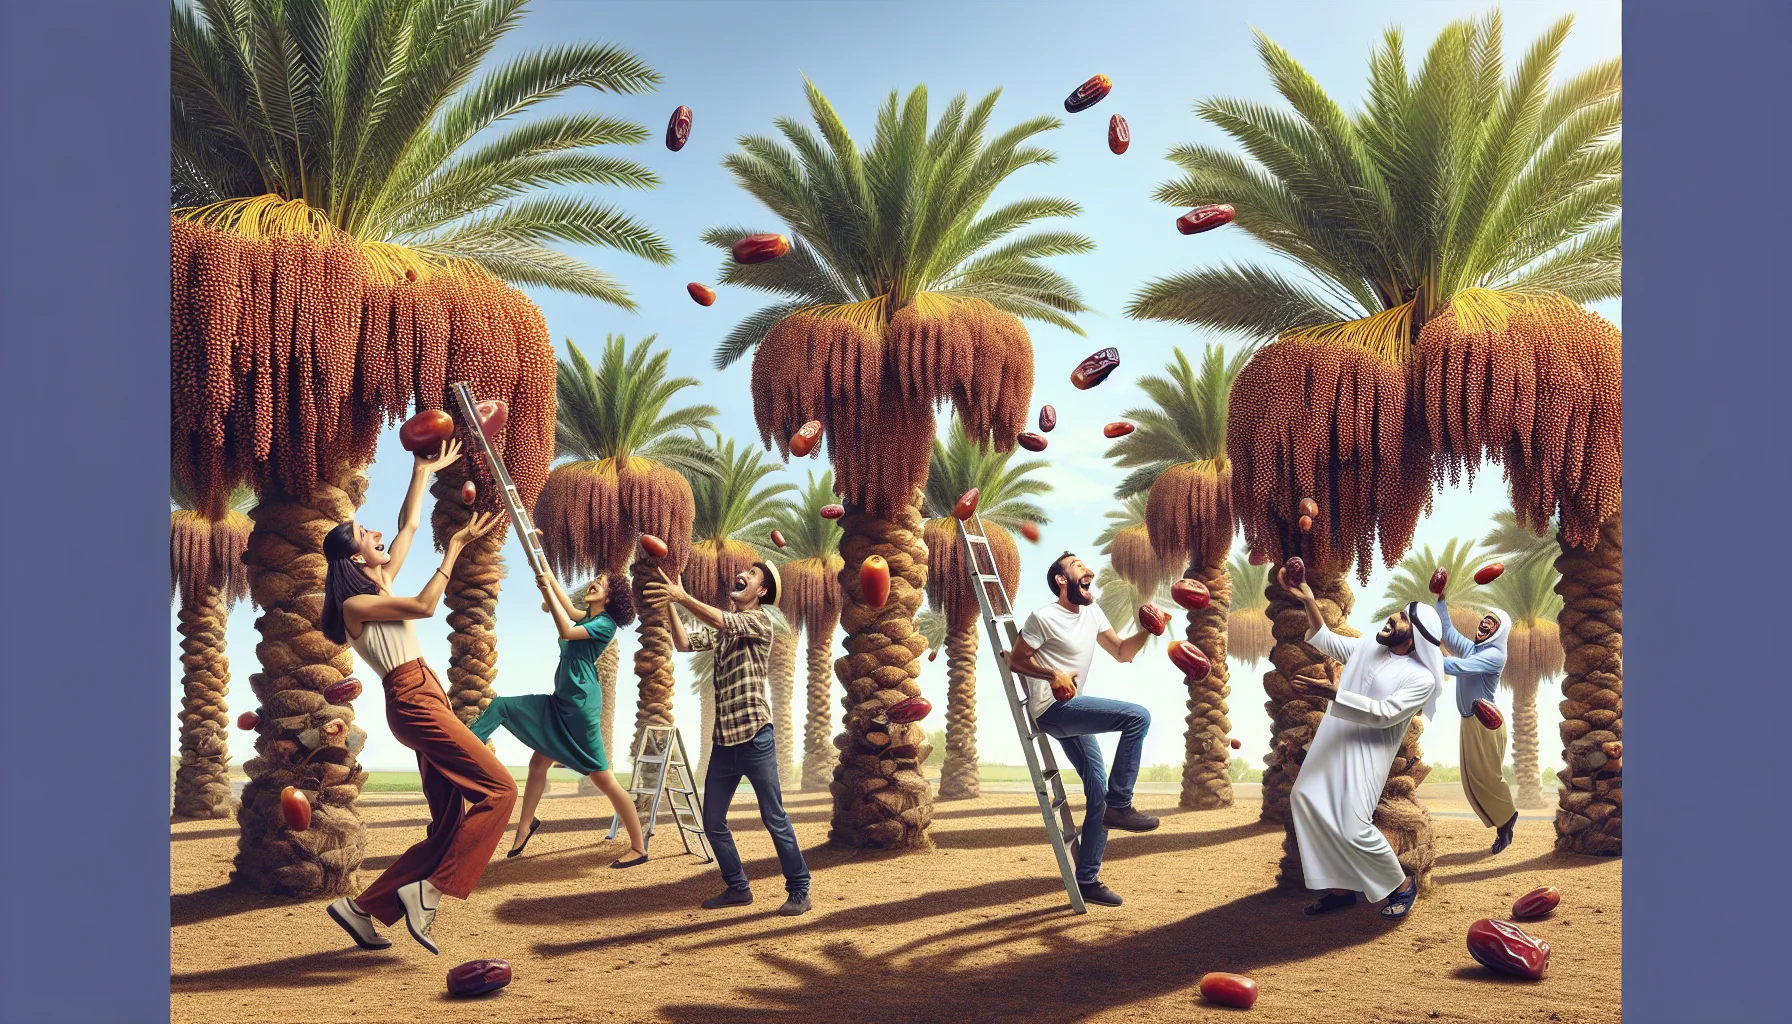 Create an eye-catching and humorous scene focused on date palms. Visualize the trees in a lively garden, stretching tall toward the clear blue sky. Each one is full of ripened dates, almost tilting with the weight. A group of people, including a jubilant Caucasian woman, an enthusiastic South Asian man, a joyful Middle-Eastern man, and a delighted Black woman actively participate in the harvest. Their amusing antics, like carrying ladders clumsily or having overhearing dates tumble onto their hats, serve to invite the viewers into the joy of gardening.